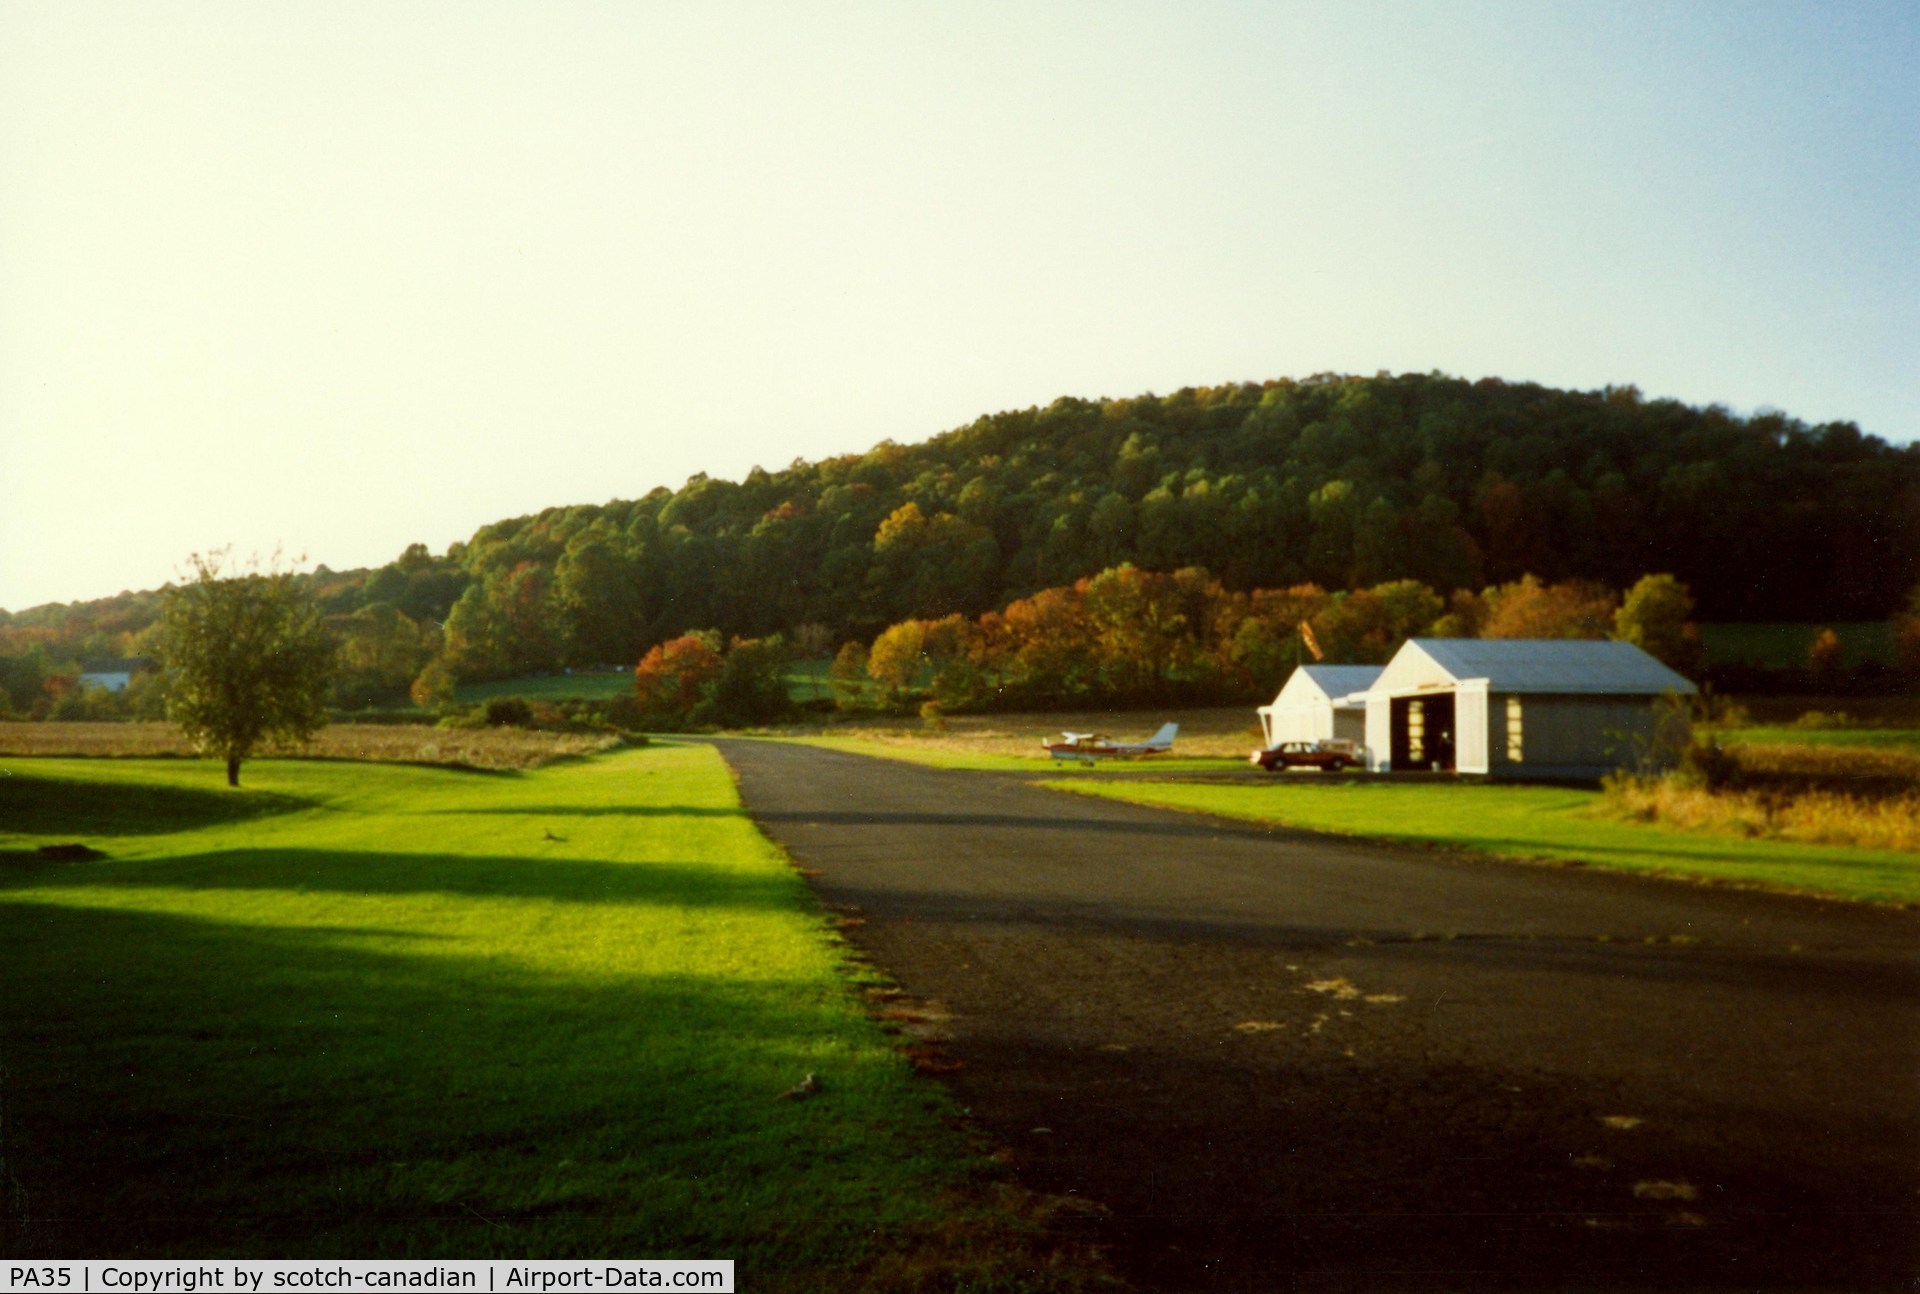 Bally Spring Farm Airport (PA35) - Looking Northwest down Runway 31 at Bally Spring Farm Airport, Bally, PA - October 1991